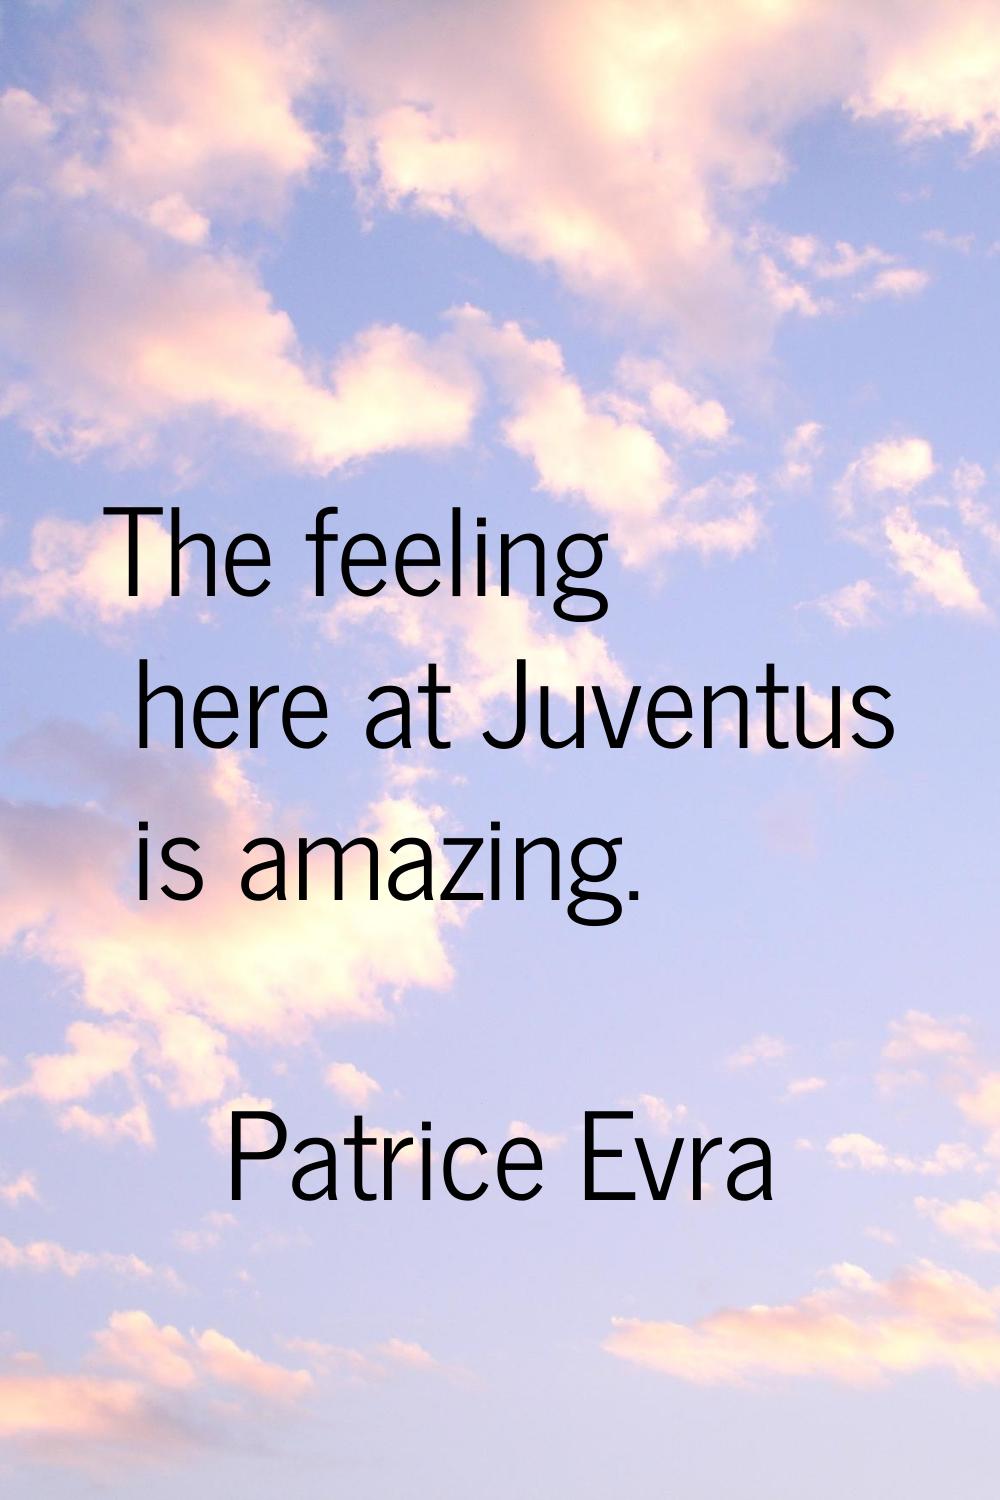 The feeling here at Juventus is amazing.